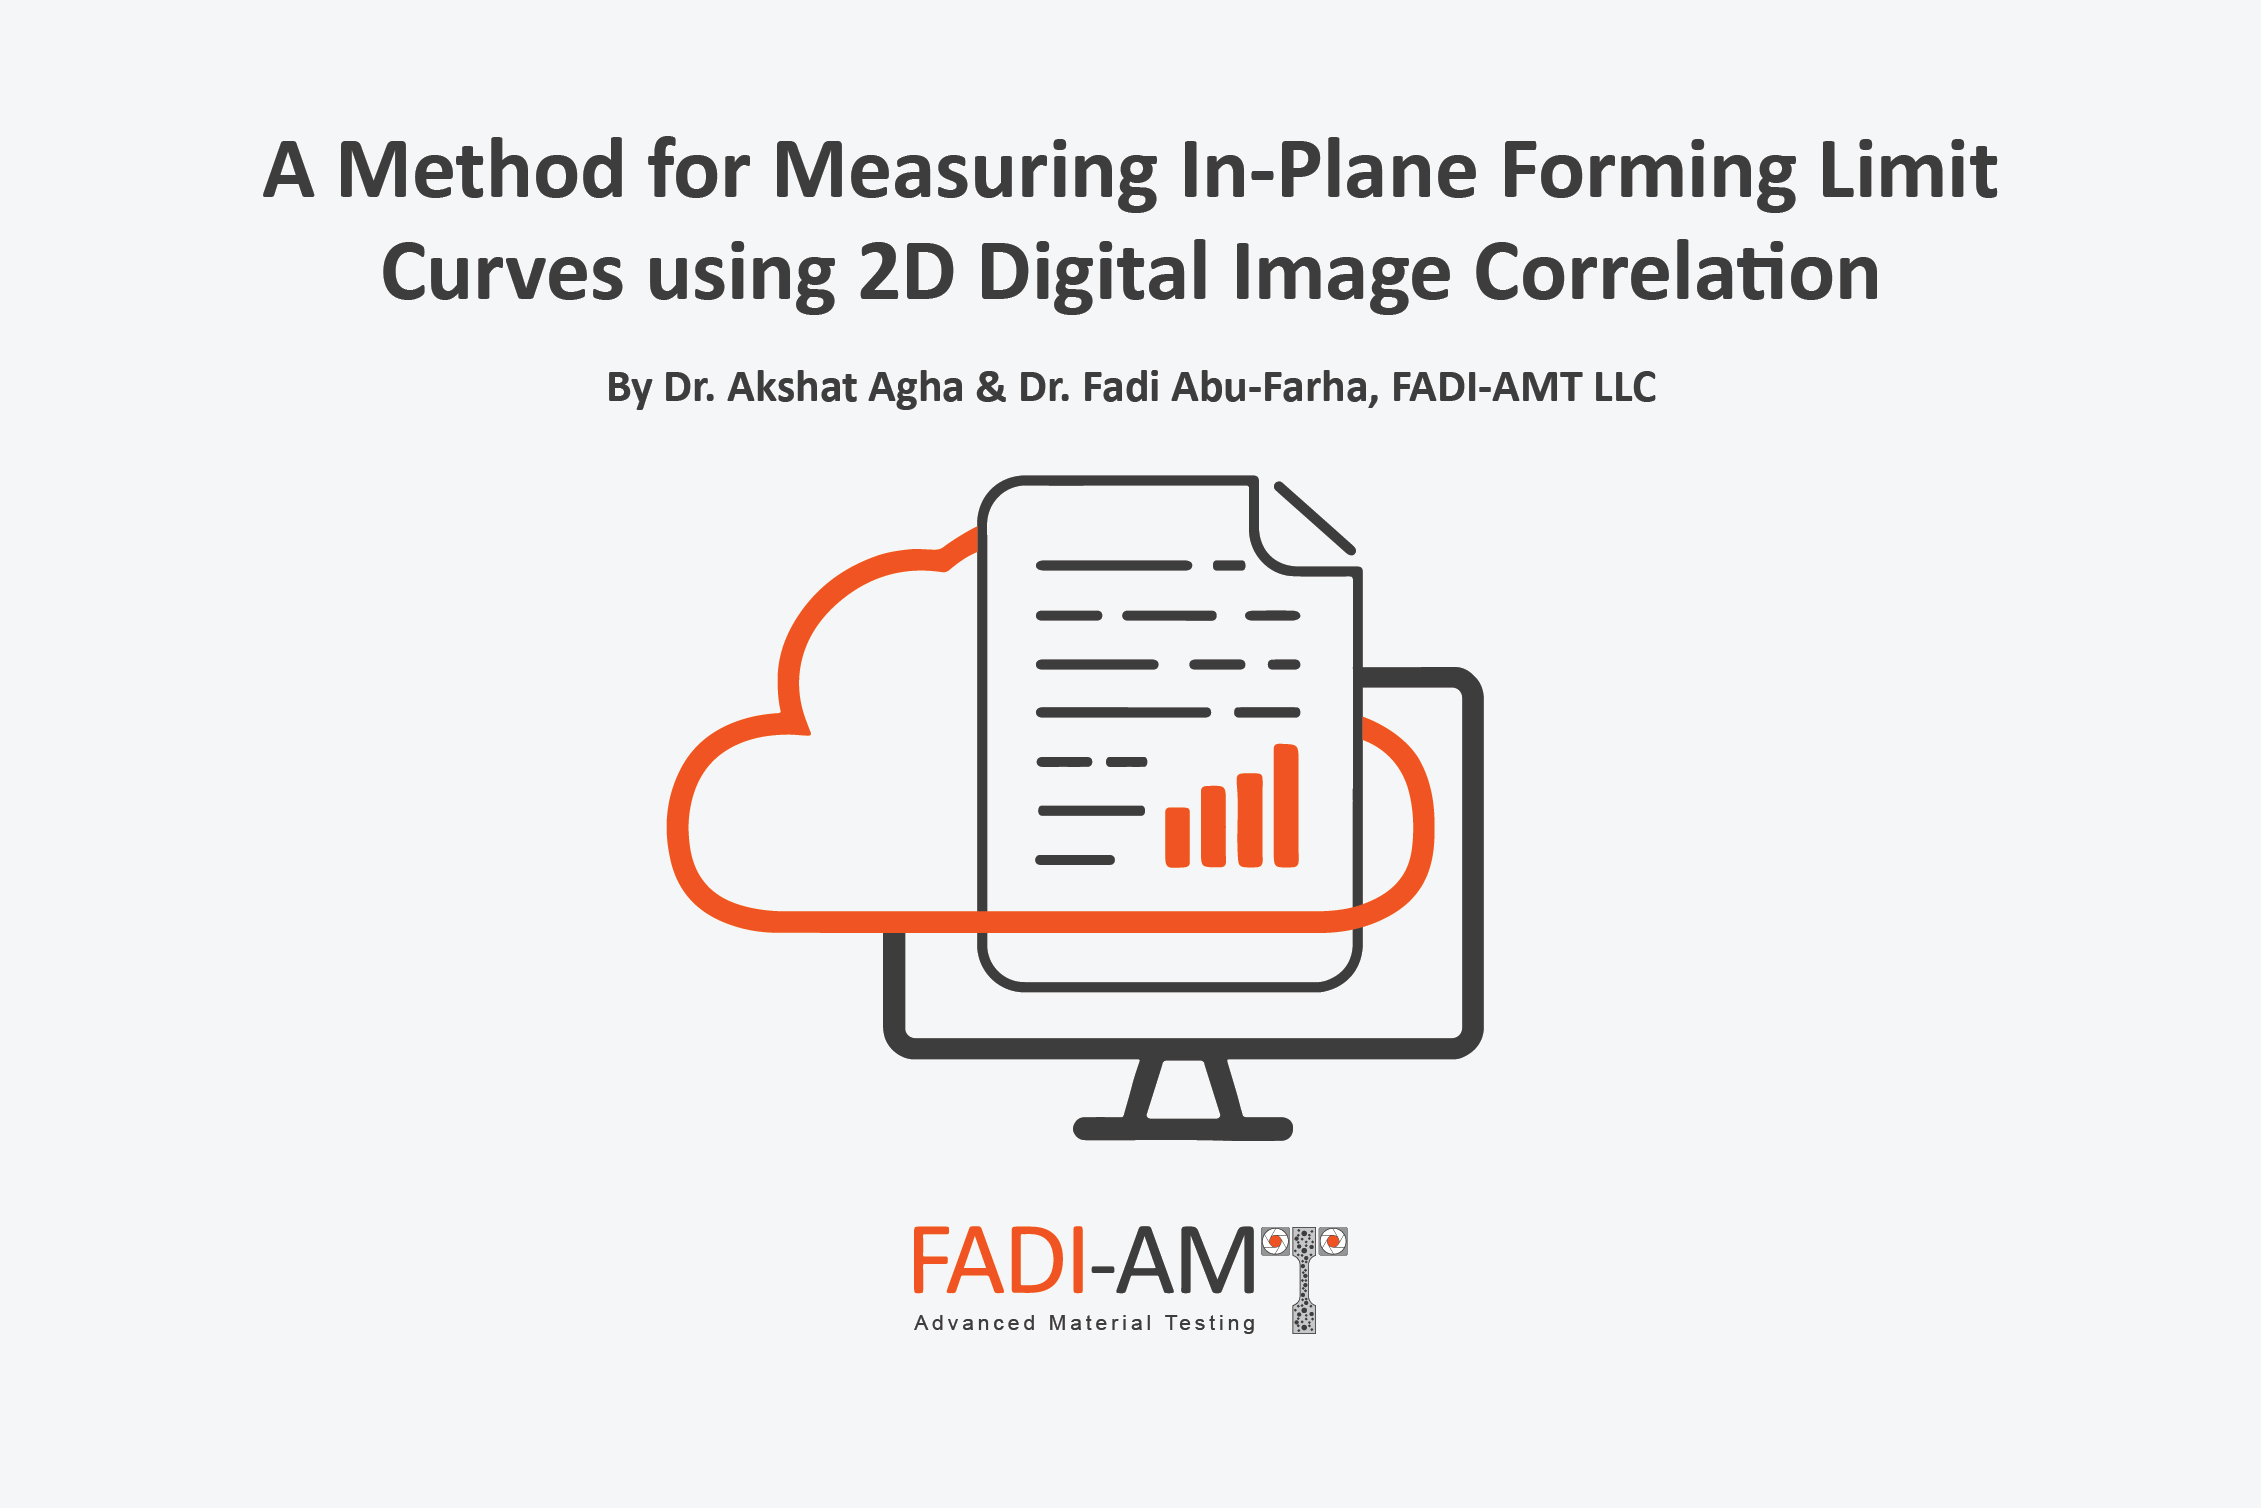 A Method for Measuring In-Plane Forming Limit Curves using 2D Digital Image Correlation_FADI-AMT-Publications